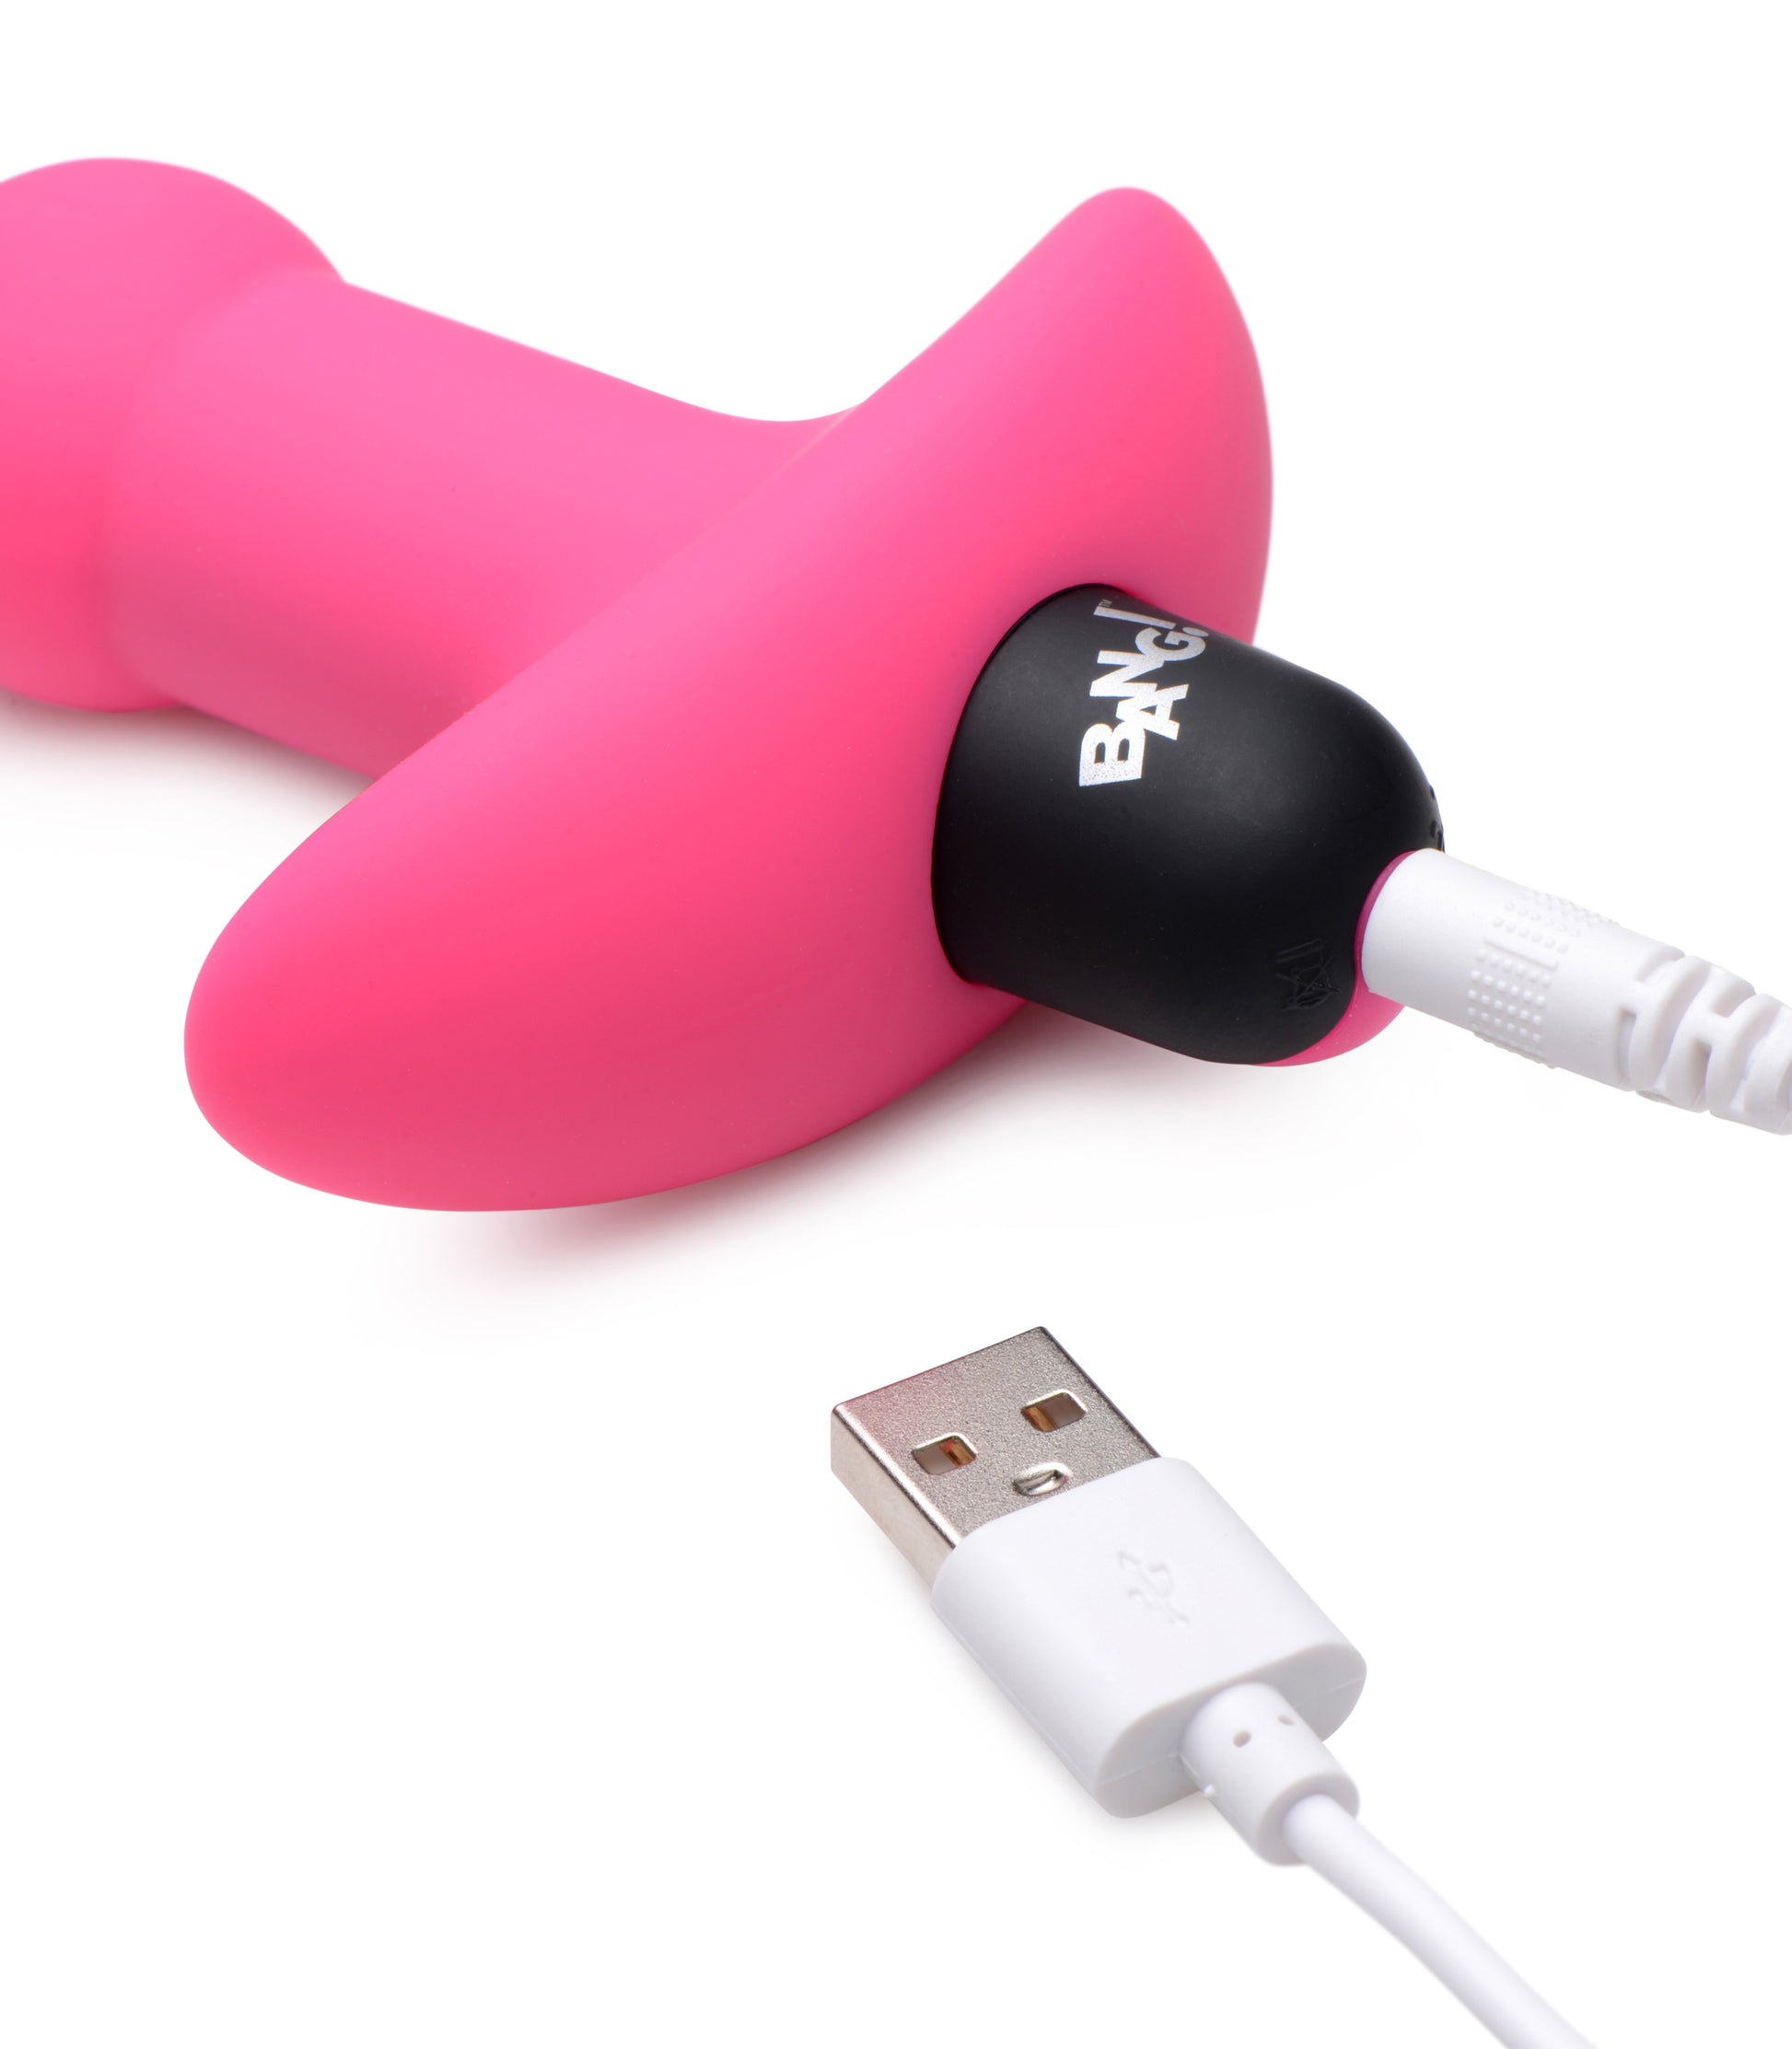 Remote Control Vibrating Silicone Anal Beads - Pink - UABDSM